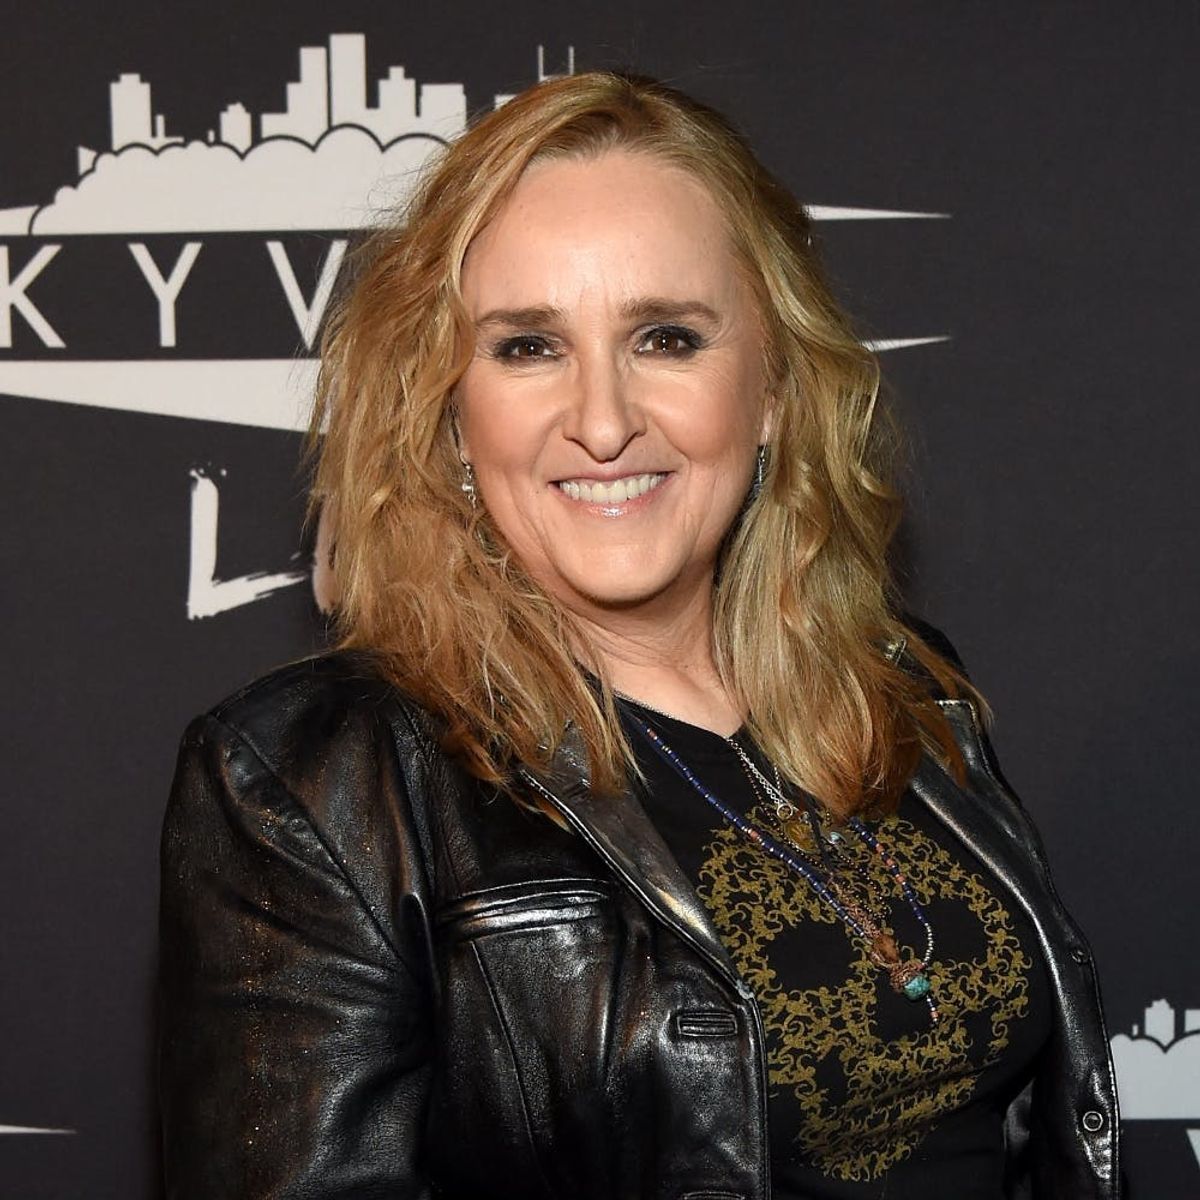 ’90s Icon Melissa Etheridge Speaks Out on Smoking Pot With Her Kids